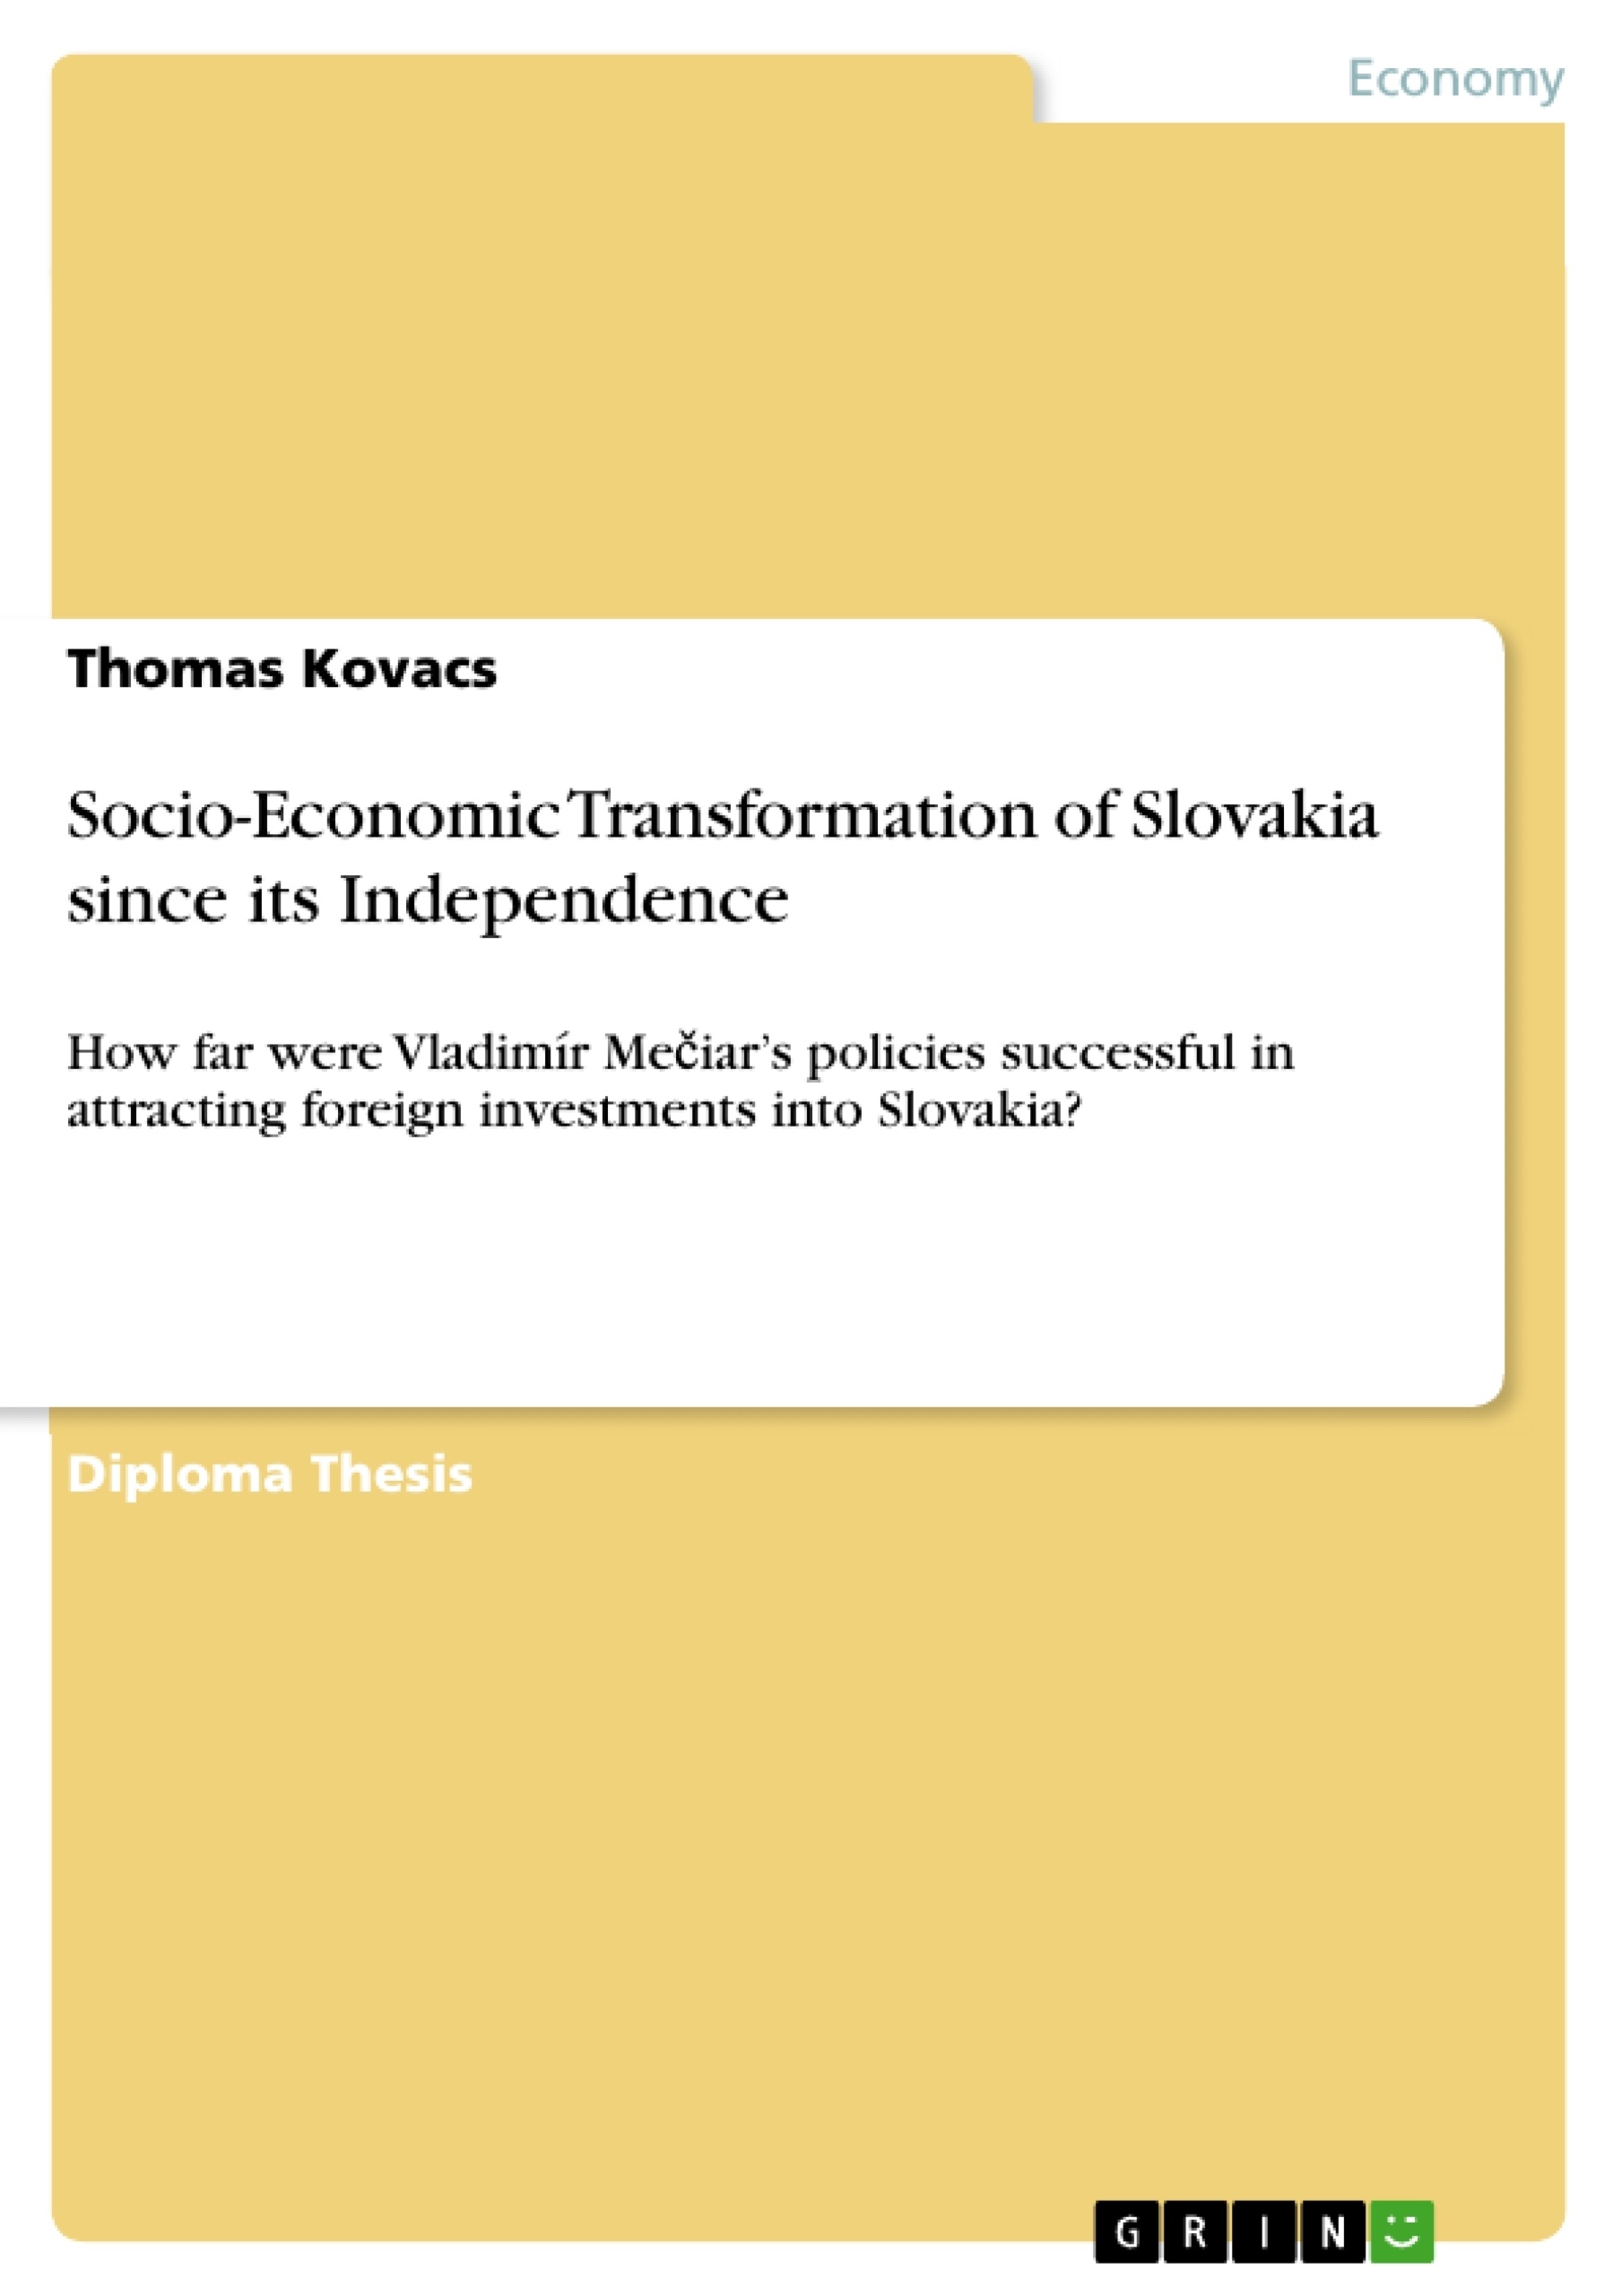 Title: Socio-Economic Transformation of Slovakia since its Independence